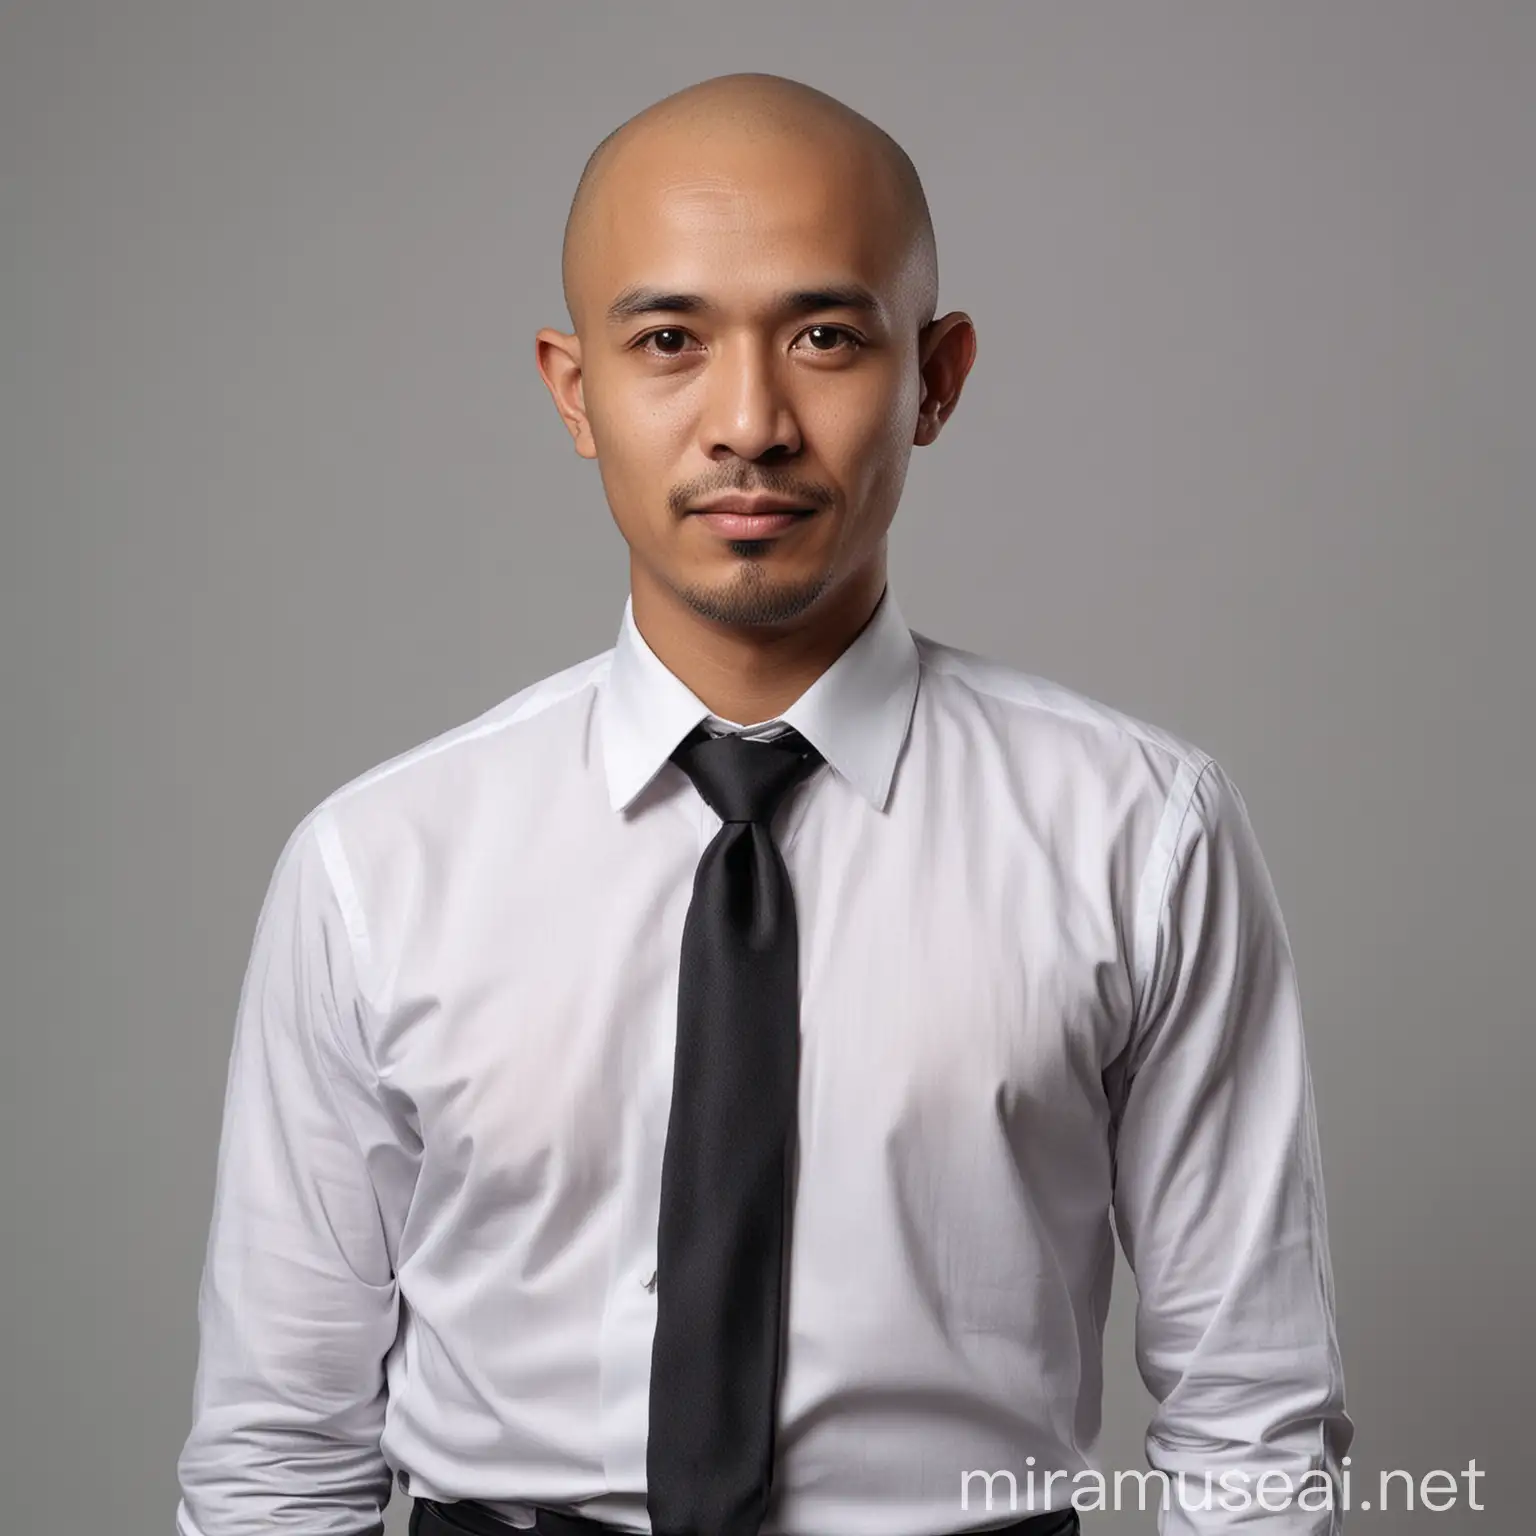 Indonesian Businessman in White Shirt and Black Tie Portrait